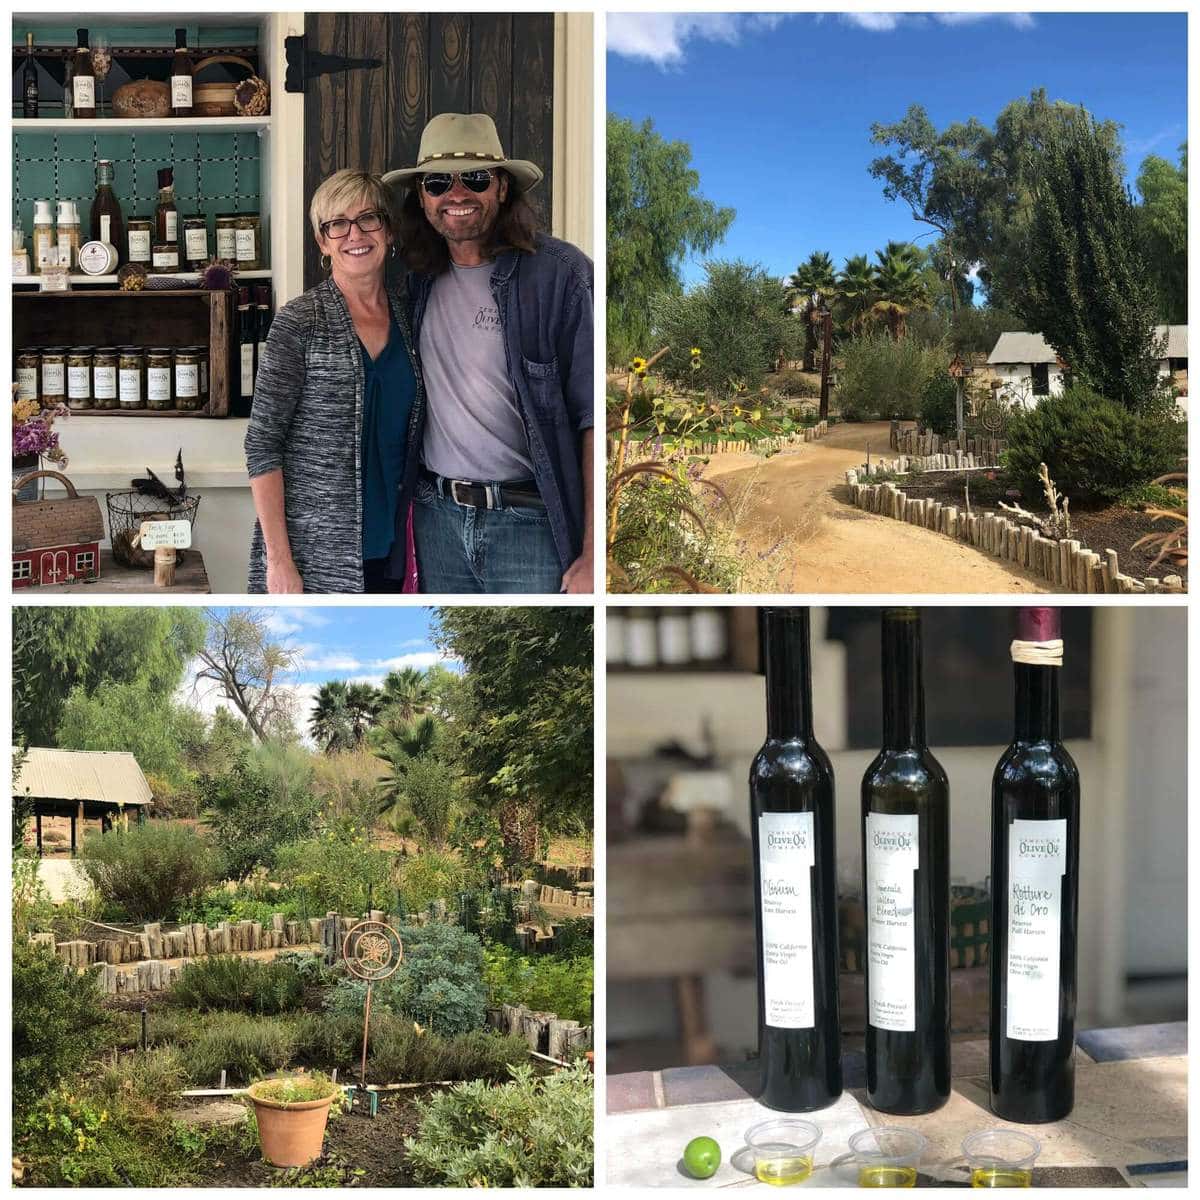 Things to do in Temecula Valley - Temecula Olive Oil Company | Peace Love and Low Carb